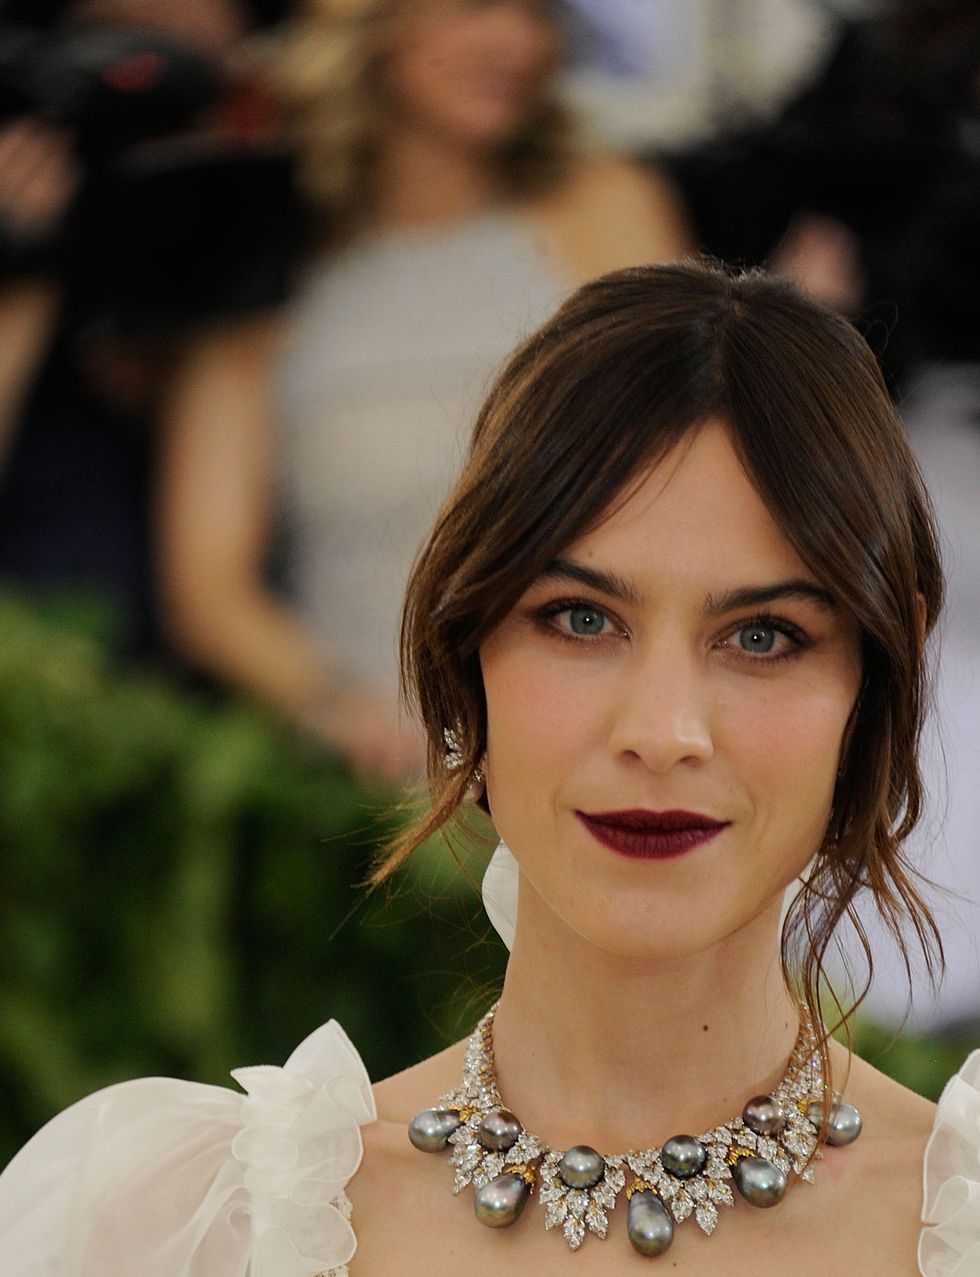 new york, ny   may 07  alexa chung attends heavenly bodies fashion  the catholic imagination costume institute gala at  the metropolitan museum of art in new york city  photo by rabbani and solimene photographygetty images